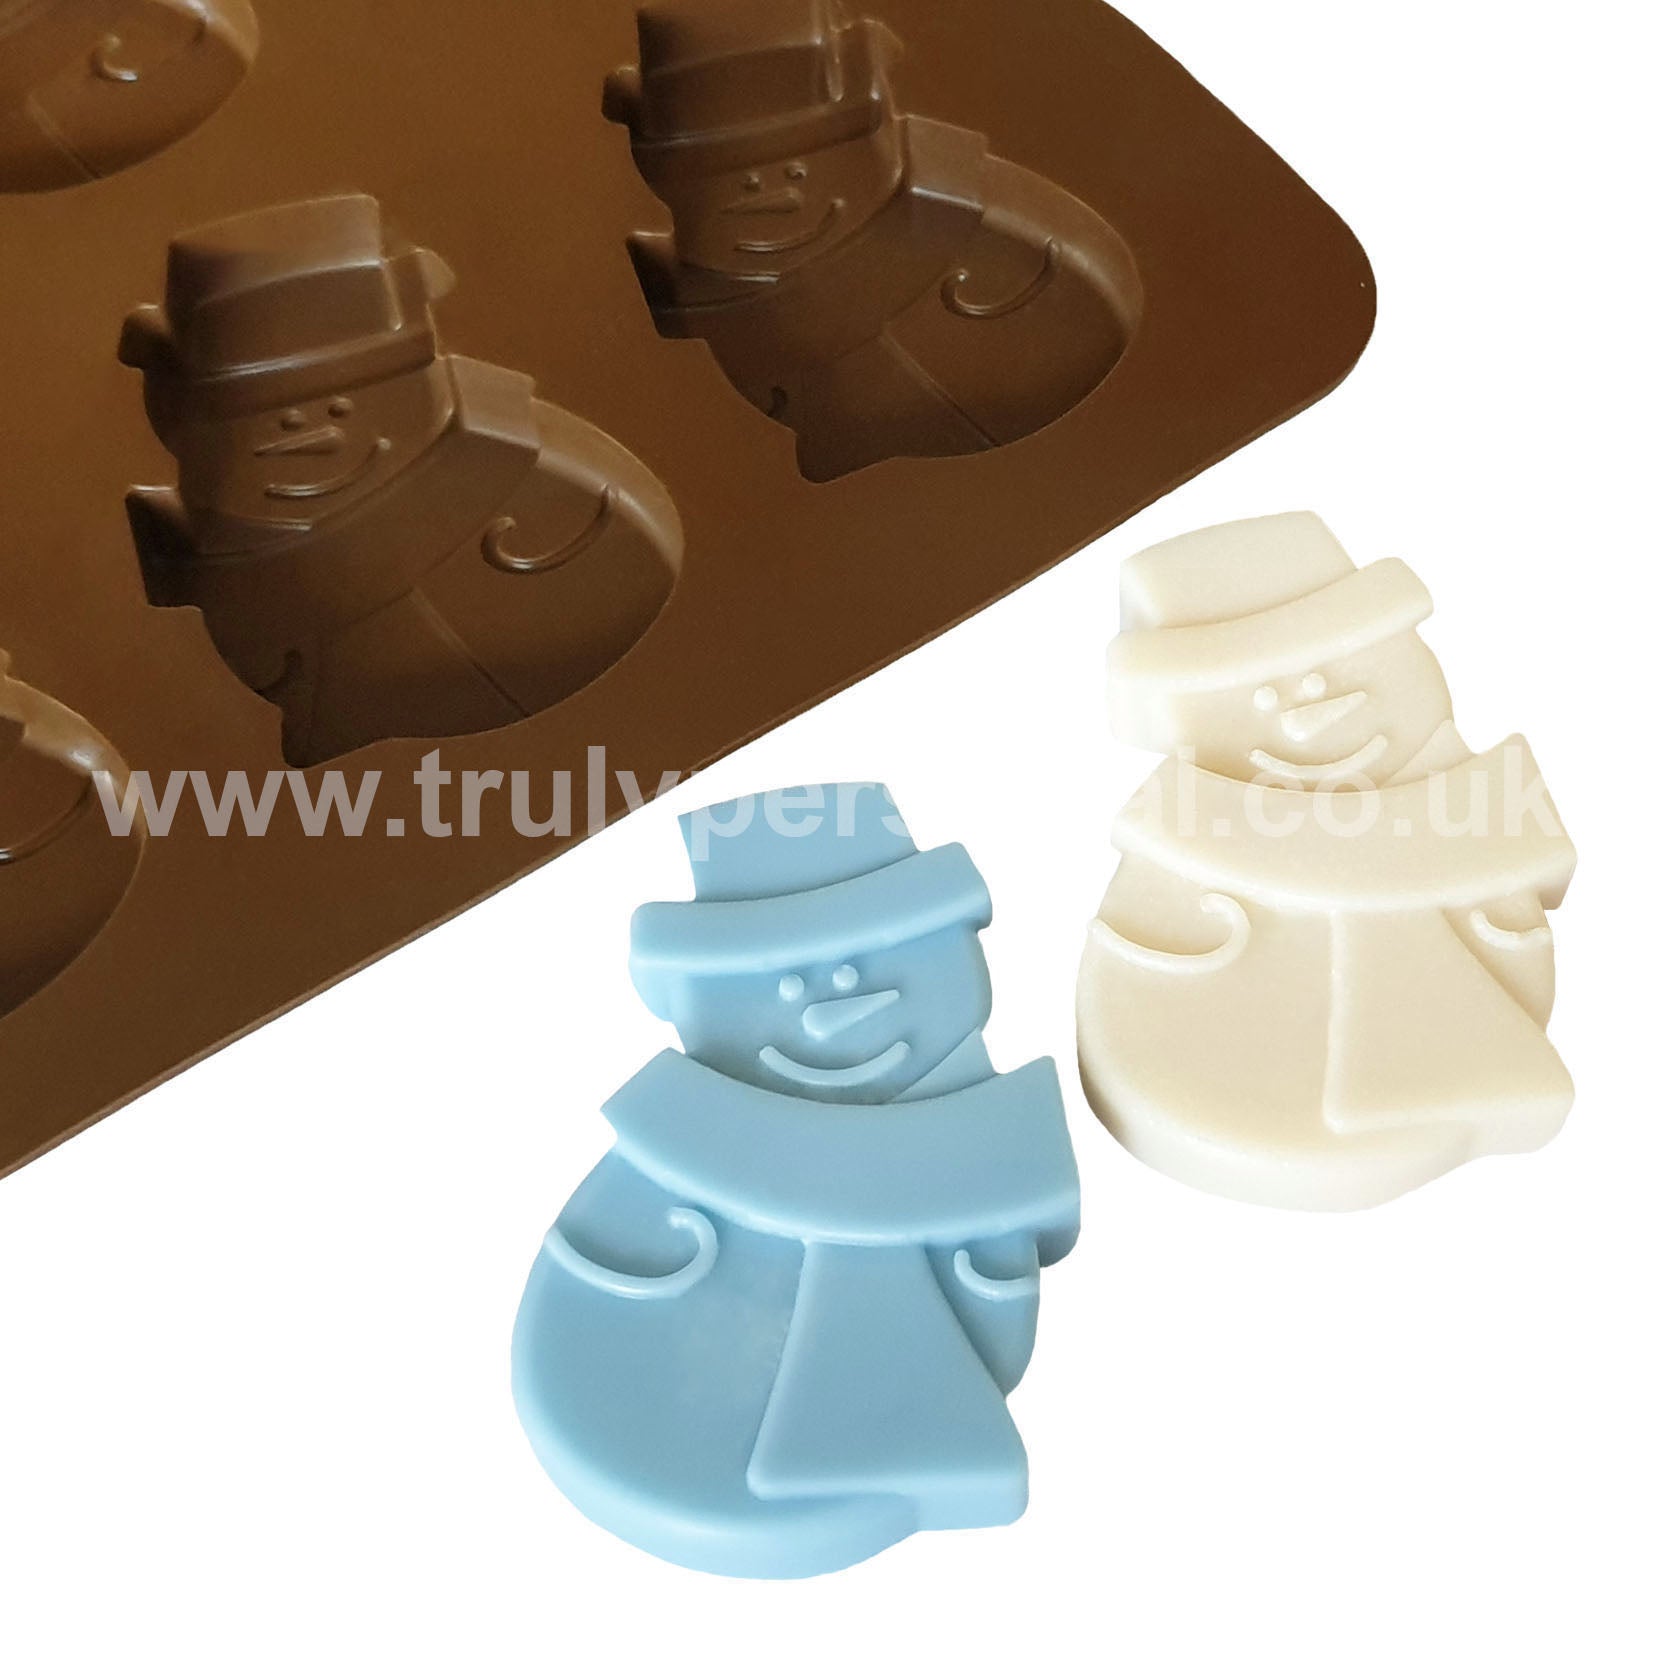 Large Snowman Silicone Mould | Wax Melts | Truly Personal Ltd